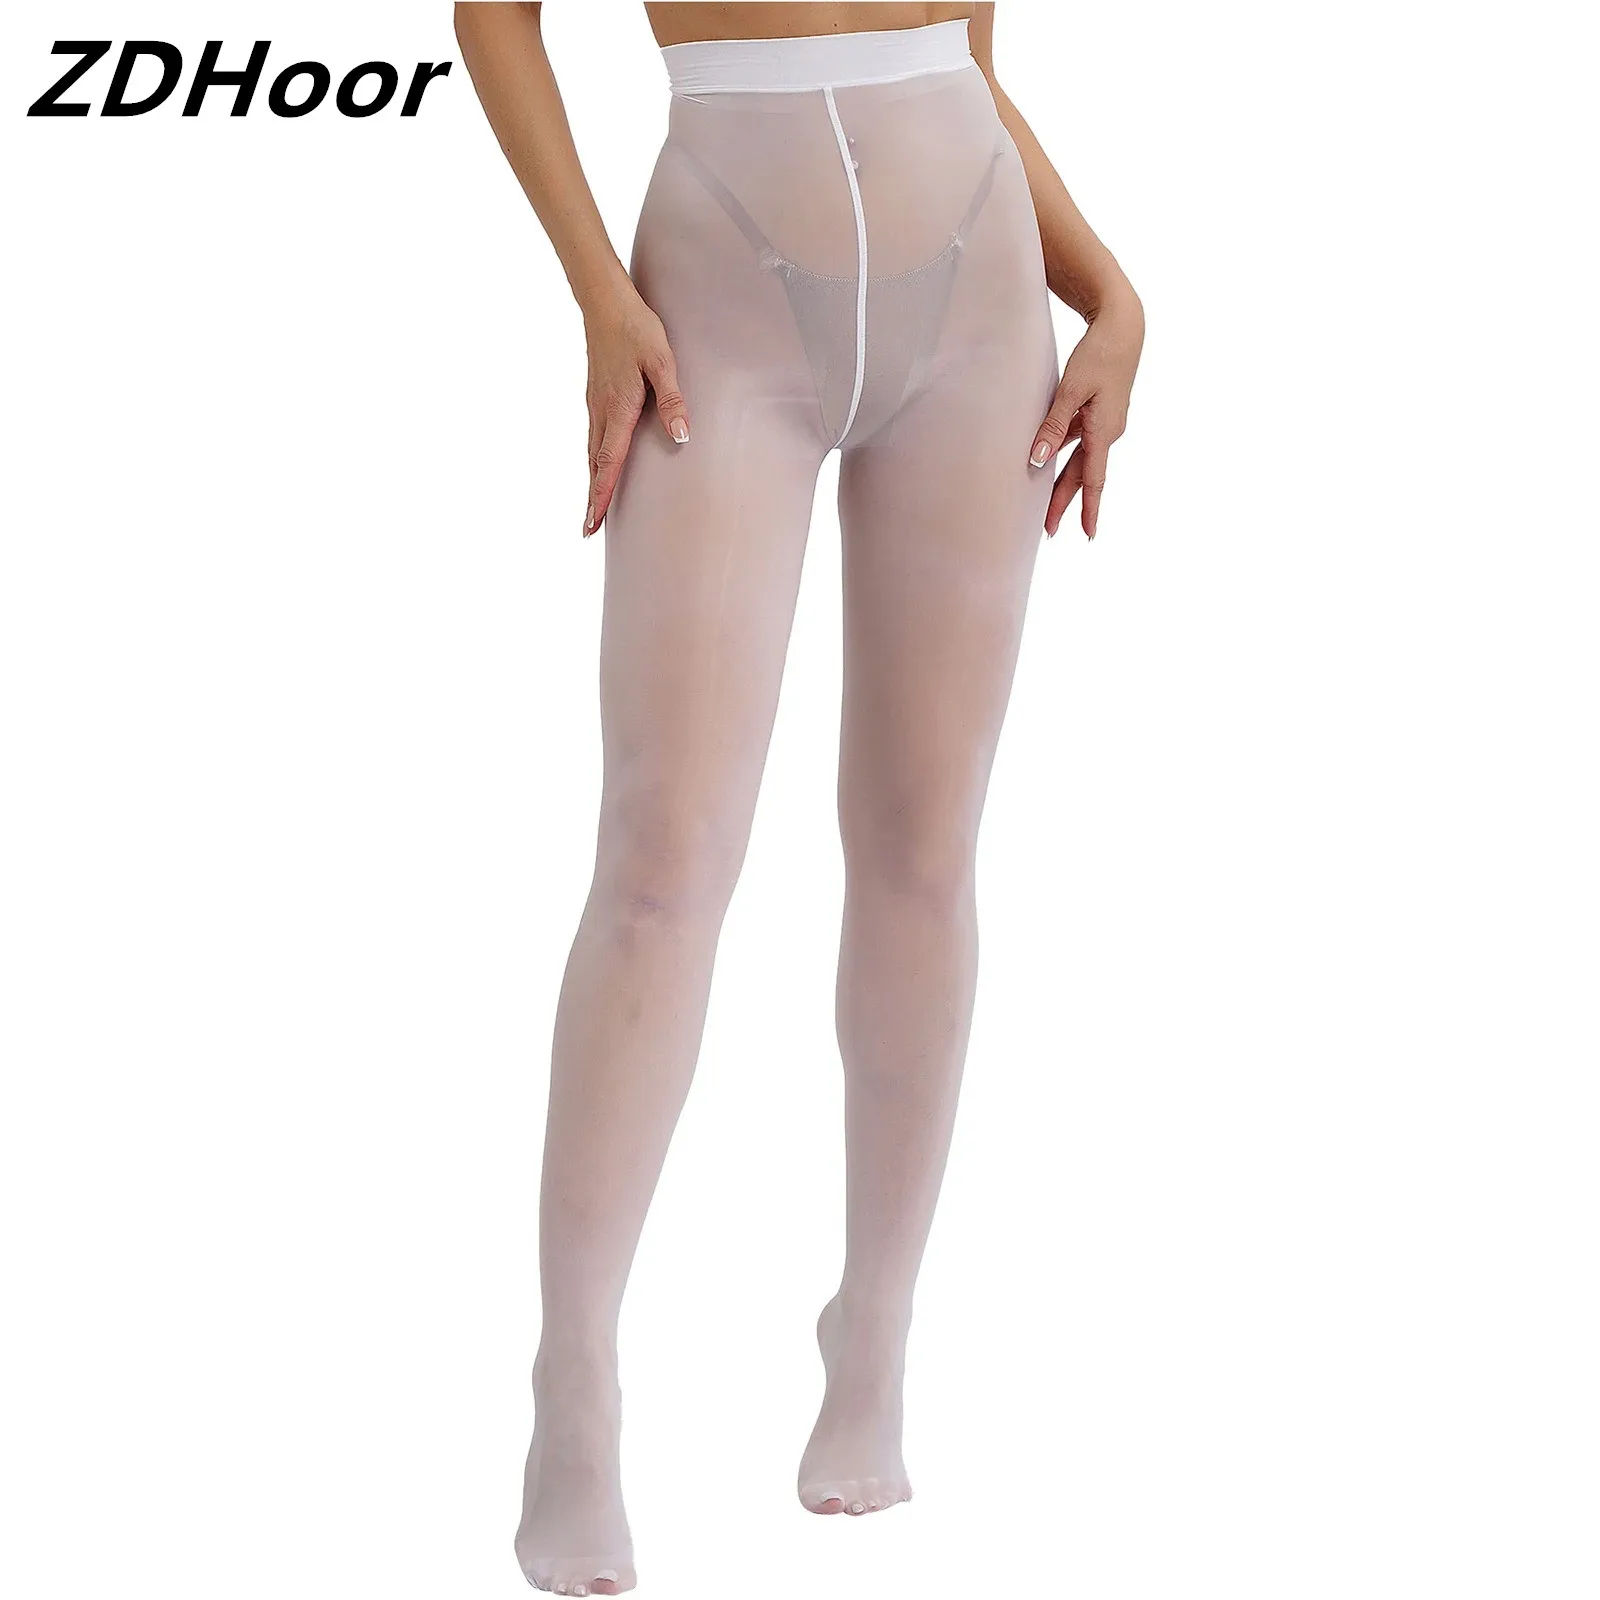 

Glossy High Stretchy Pantyhose for Womens High Waist Footed Tights Control Top Sexy See Through Bodystocking Leggings